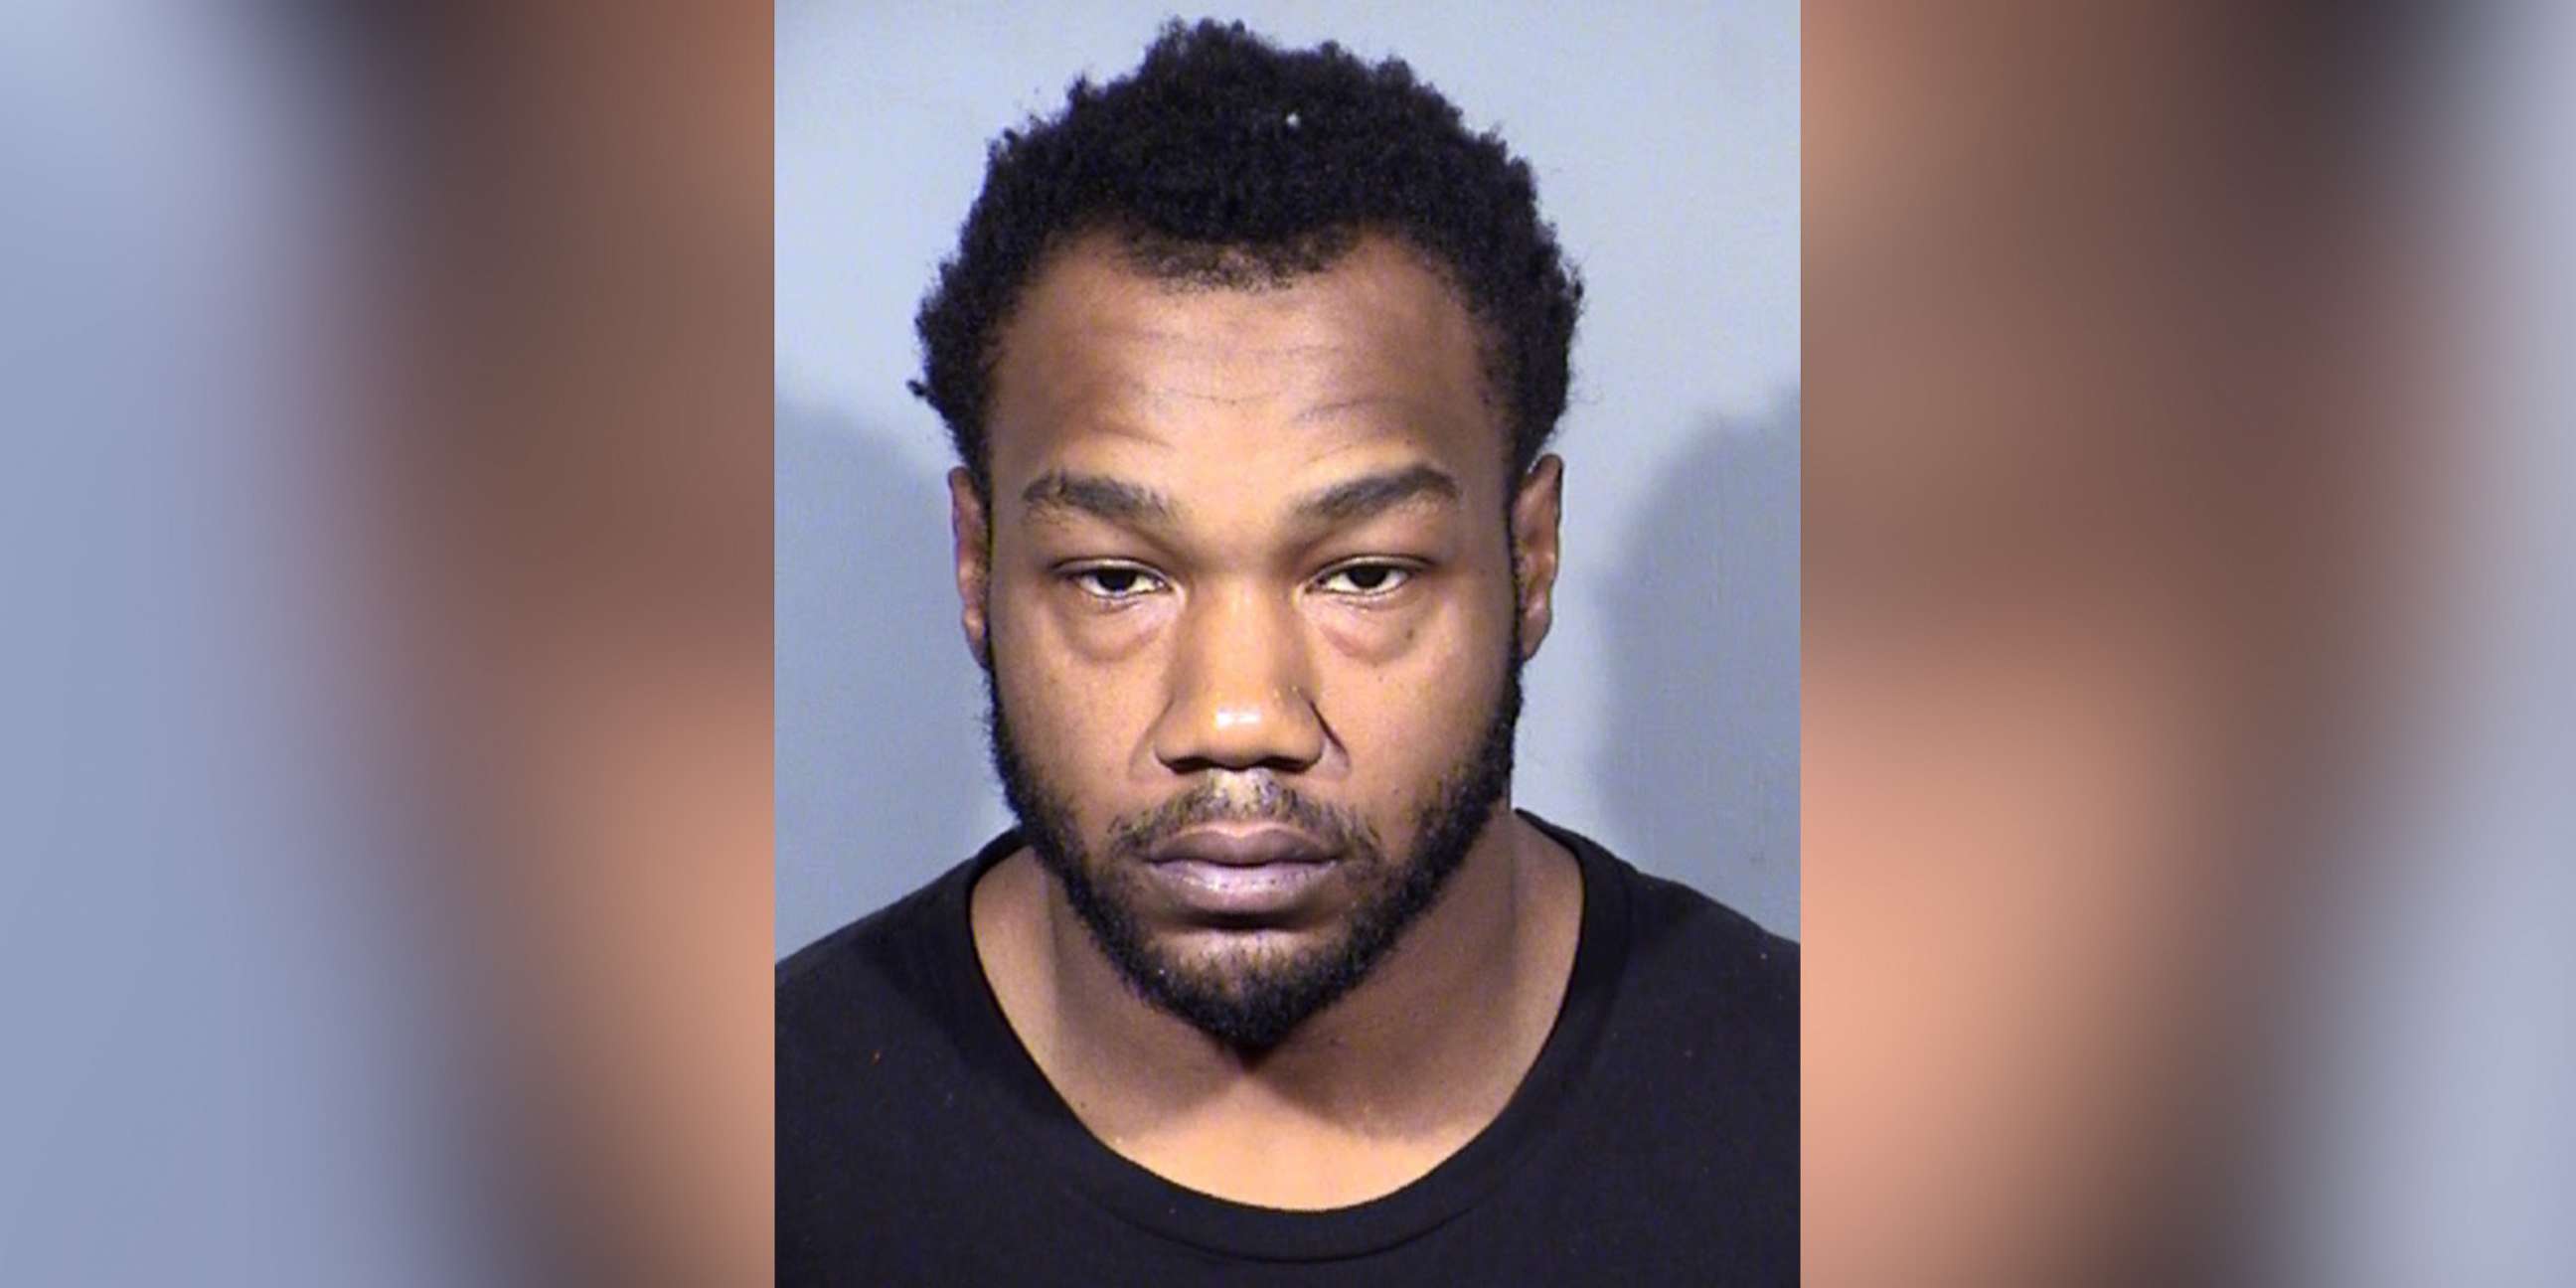 PHOTO: Darnell Rodgers, 23, was arrested Jan. 2, 2020 in Las Vegas charged with kidnapping and domestic battery after he was allegedly seen on doorbell camera video kidnapping a woman.